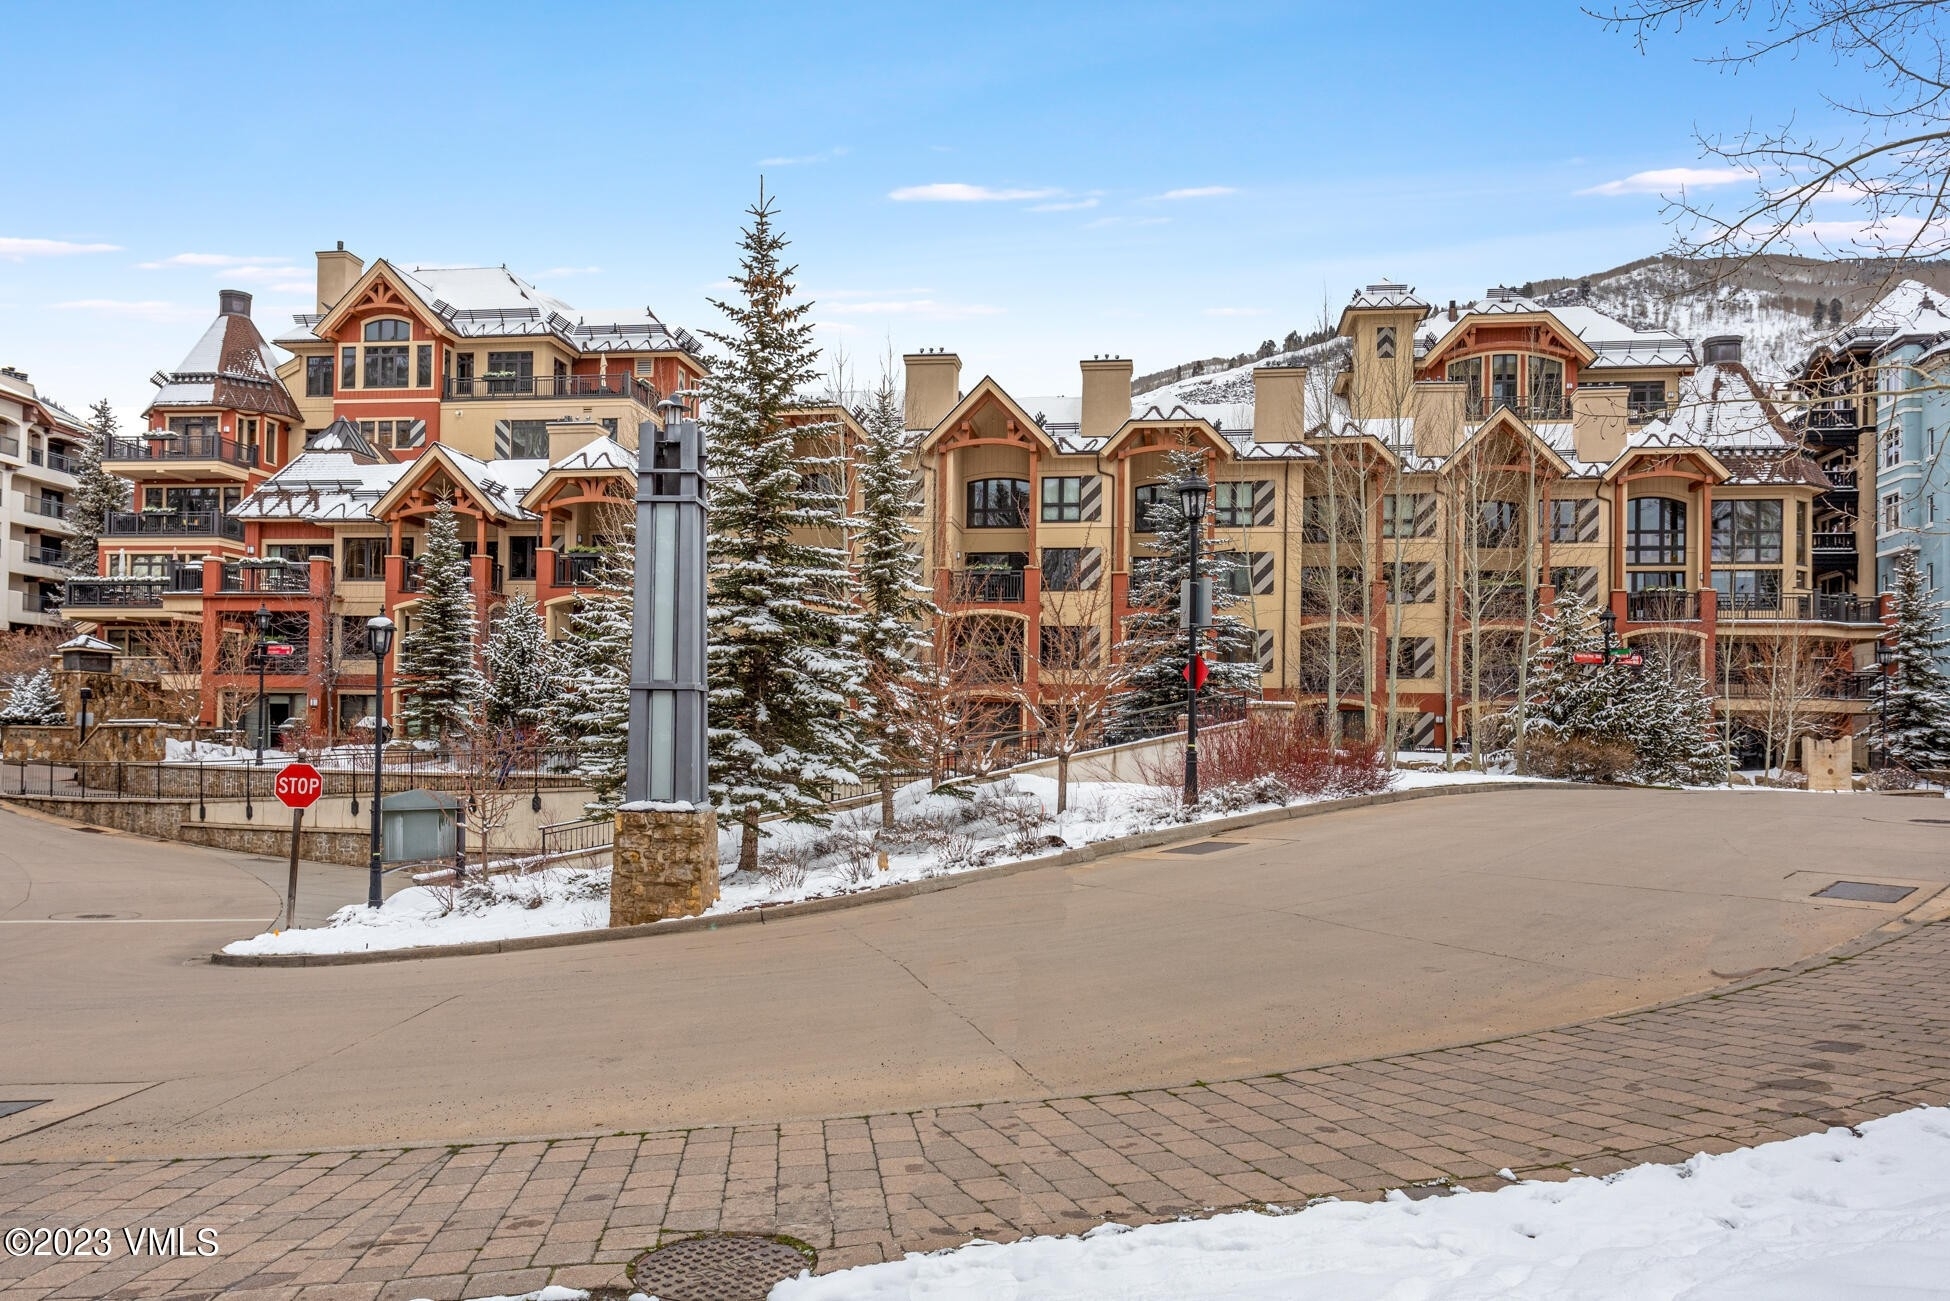 Property for Sale at Vail, Colorado 81657